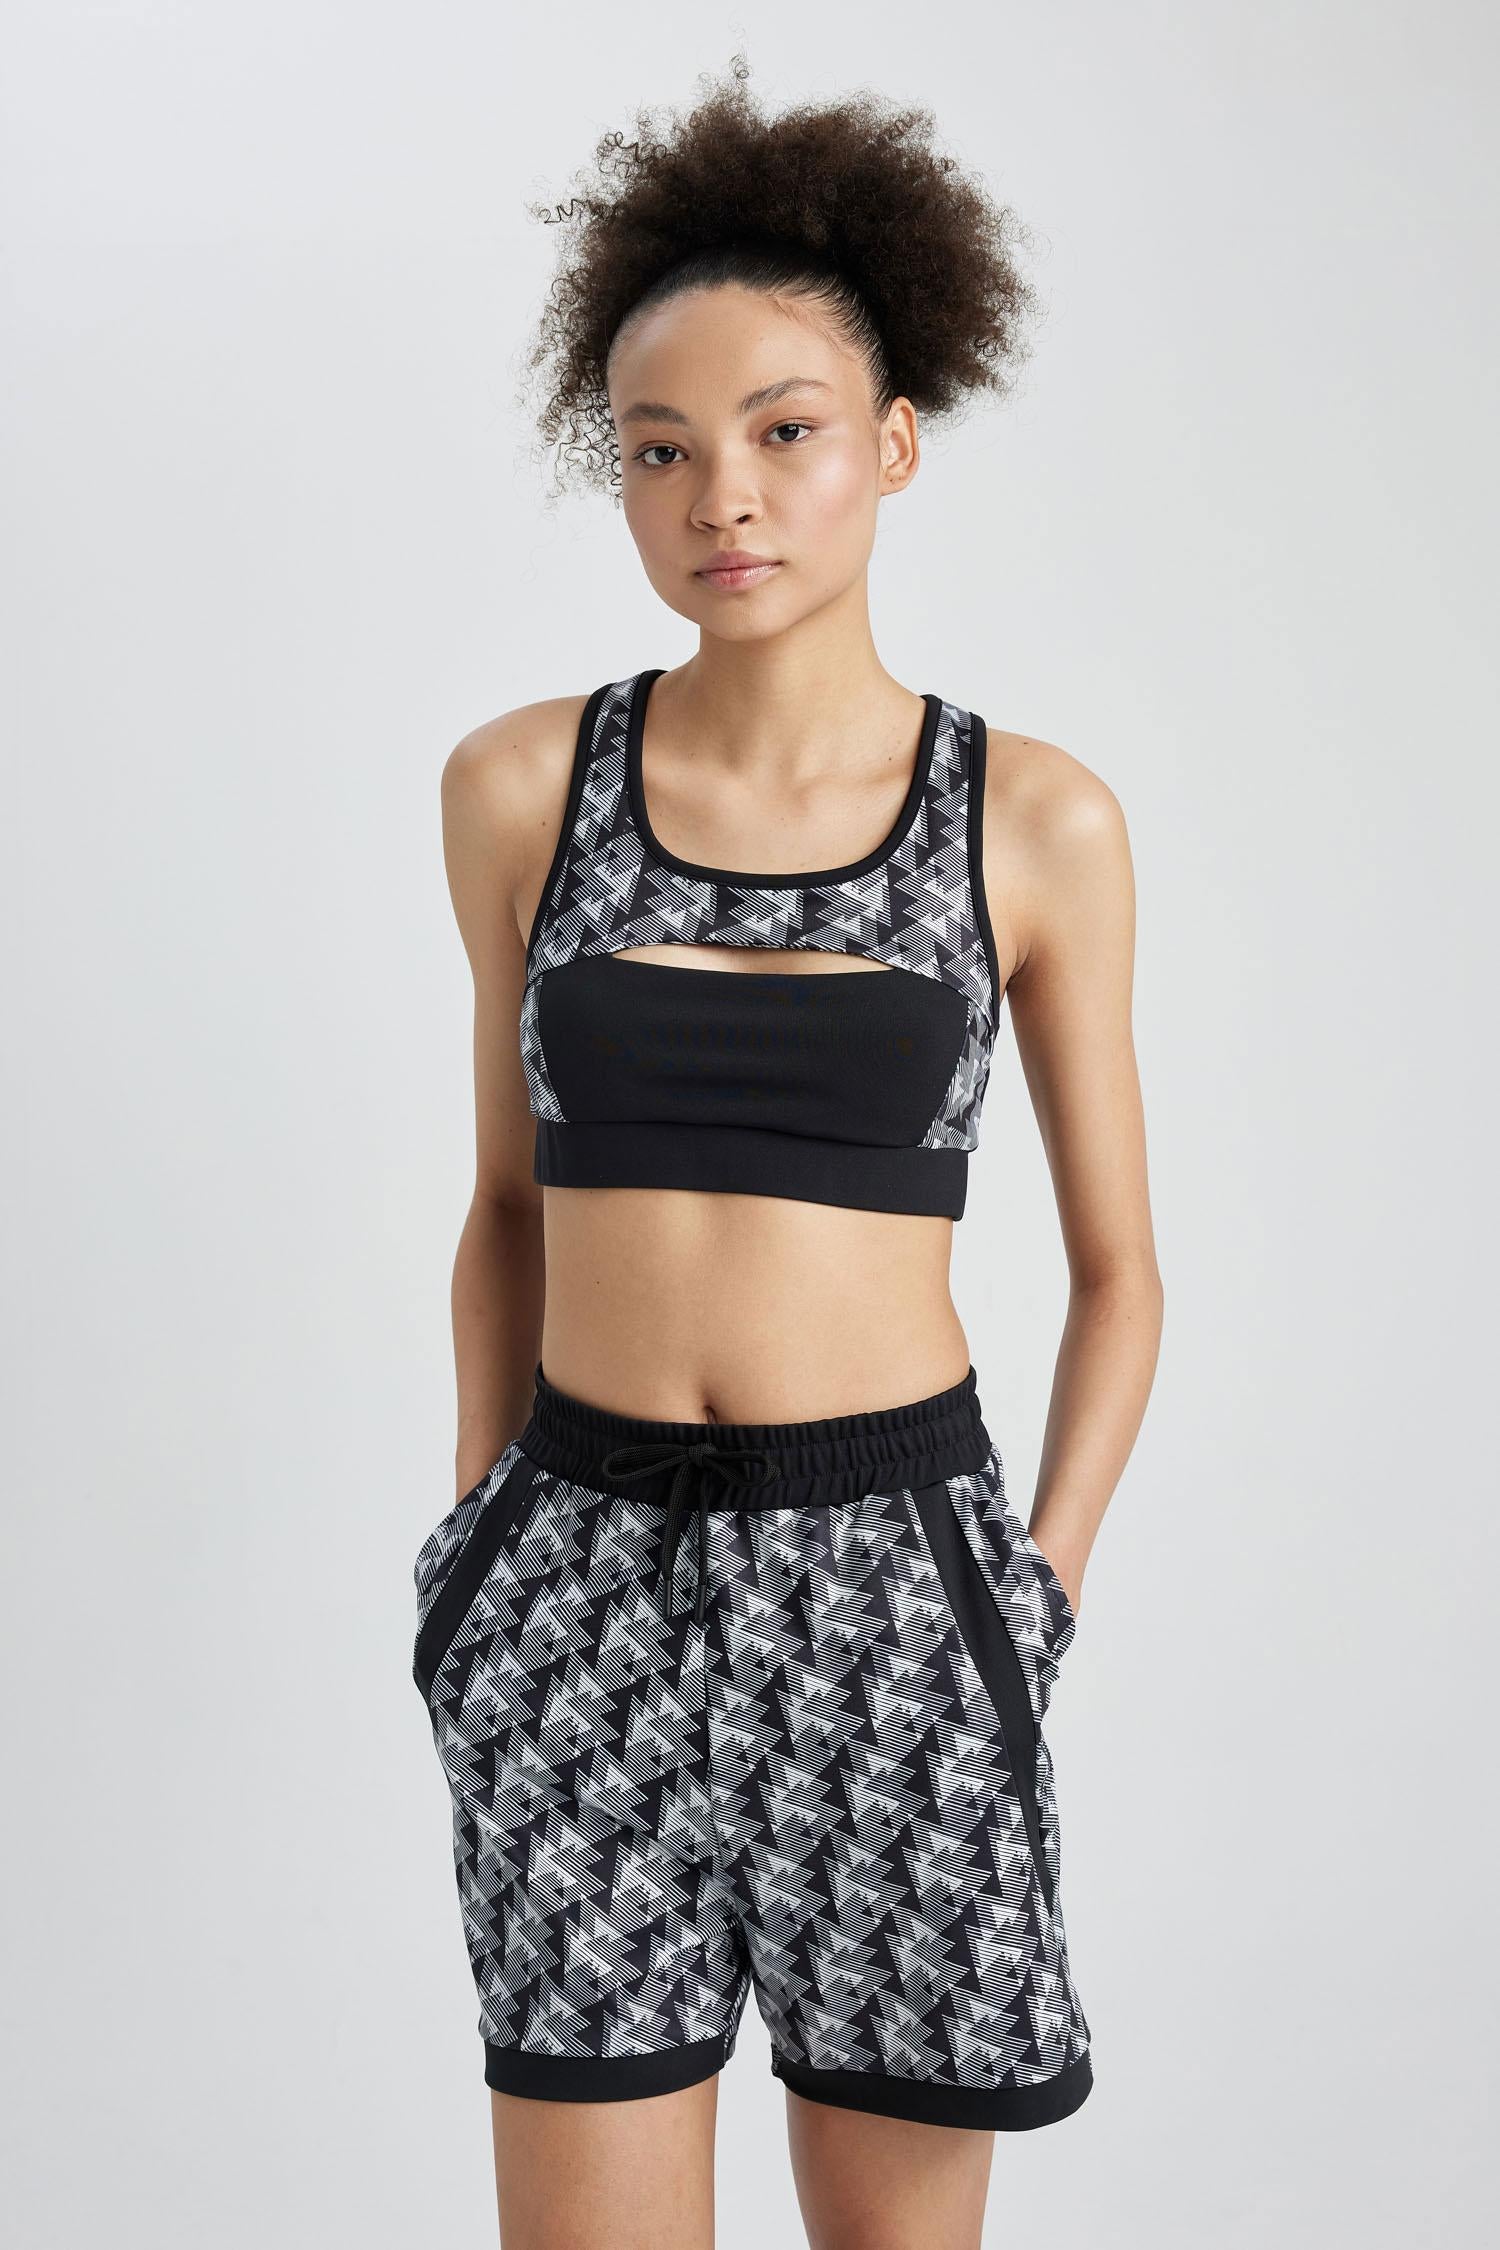 ASOS 4505 Icon high support sports bra in black